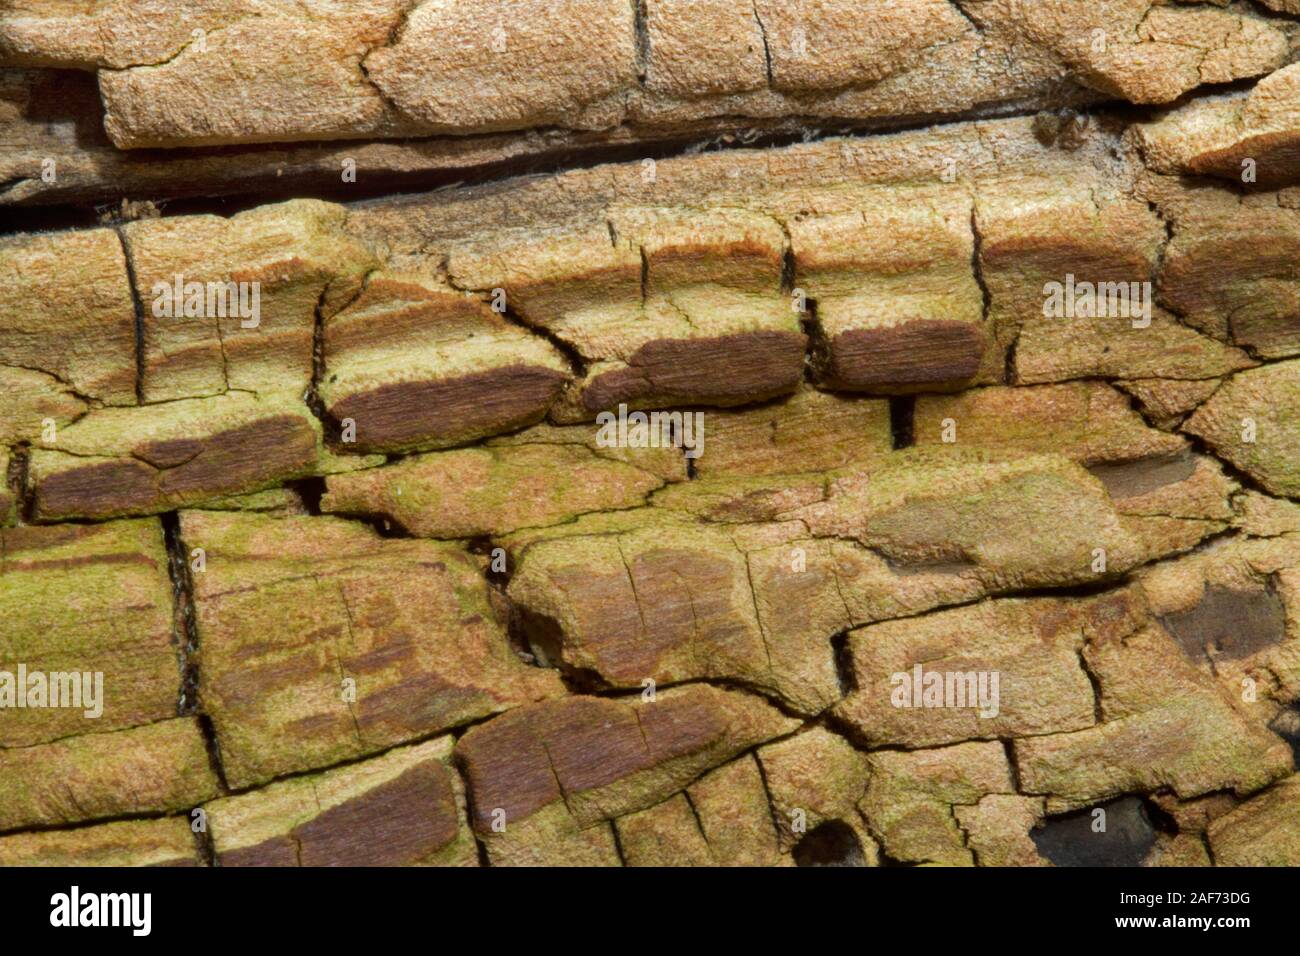 Old rotten wood of a Birch, close-up, natural background Stock Photo